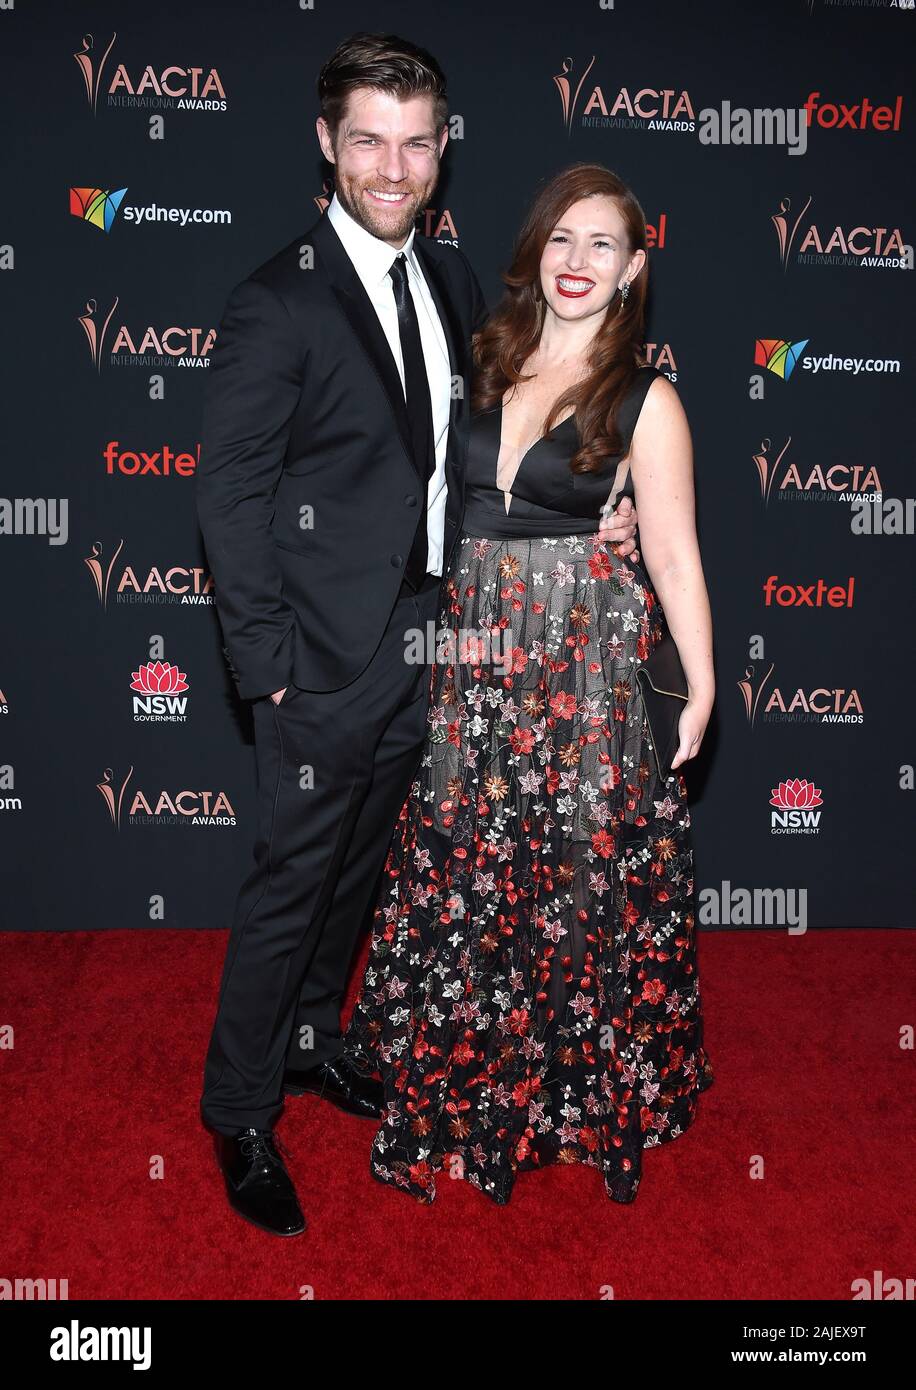 January 3, 2020, West Hollywood, California, USA: Liam McIntyre and Erin Hasan arrives for the 9th AACTA International Awards at SKYBAR at The Mondrian. (Credit Image: © Lisa O'Connor/ZUMA Wire) Stock Photo